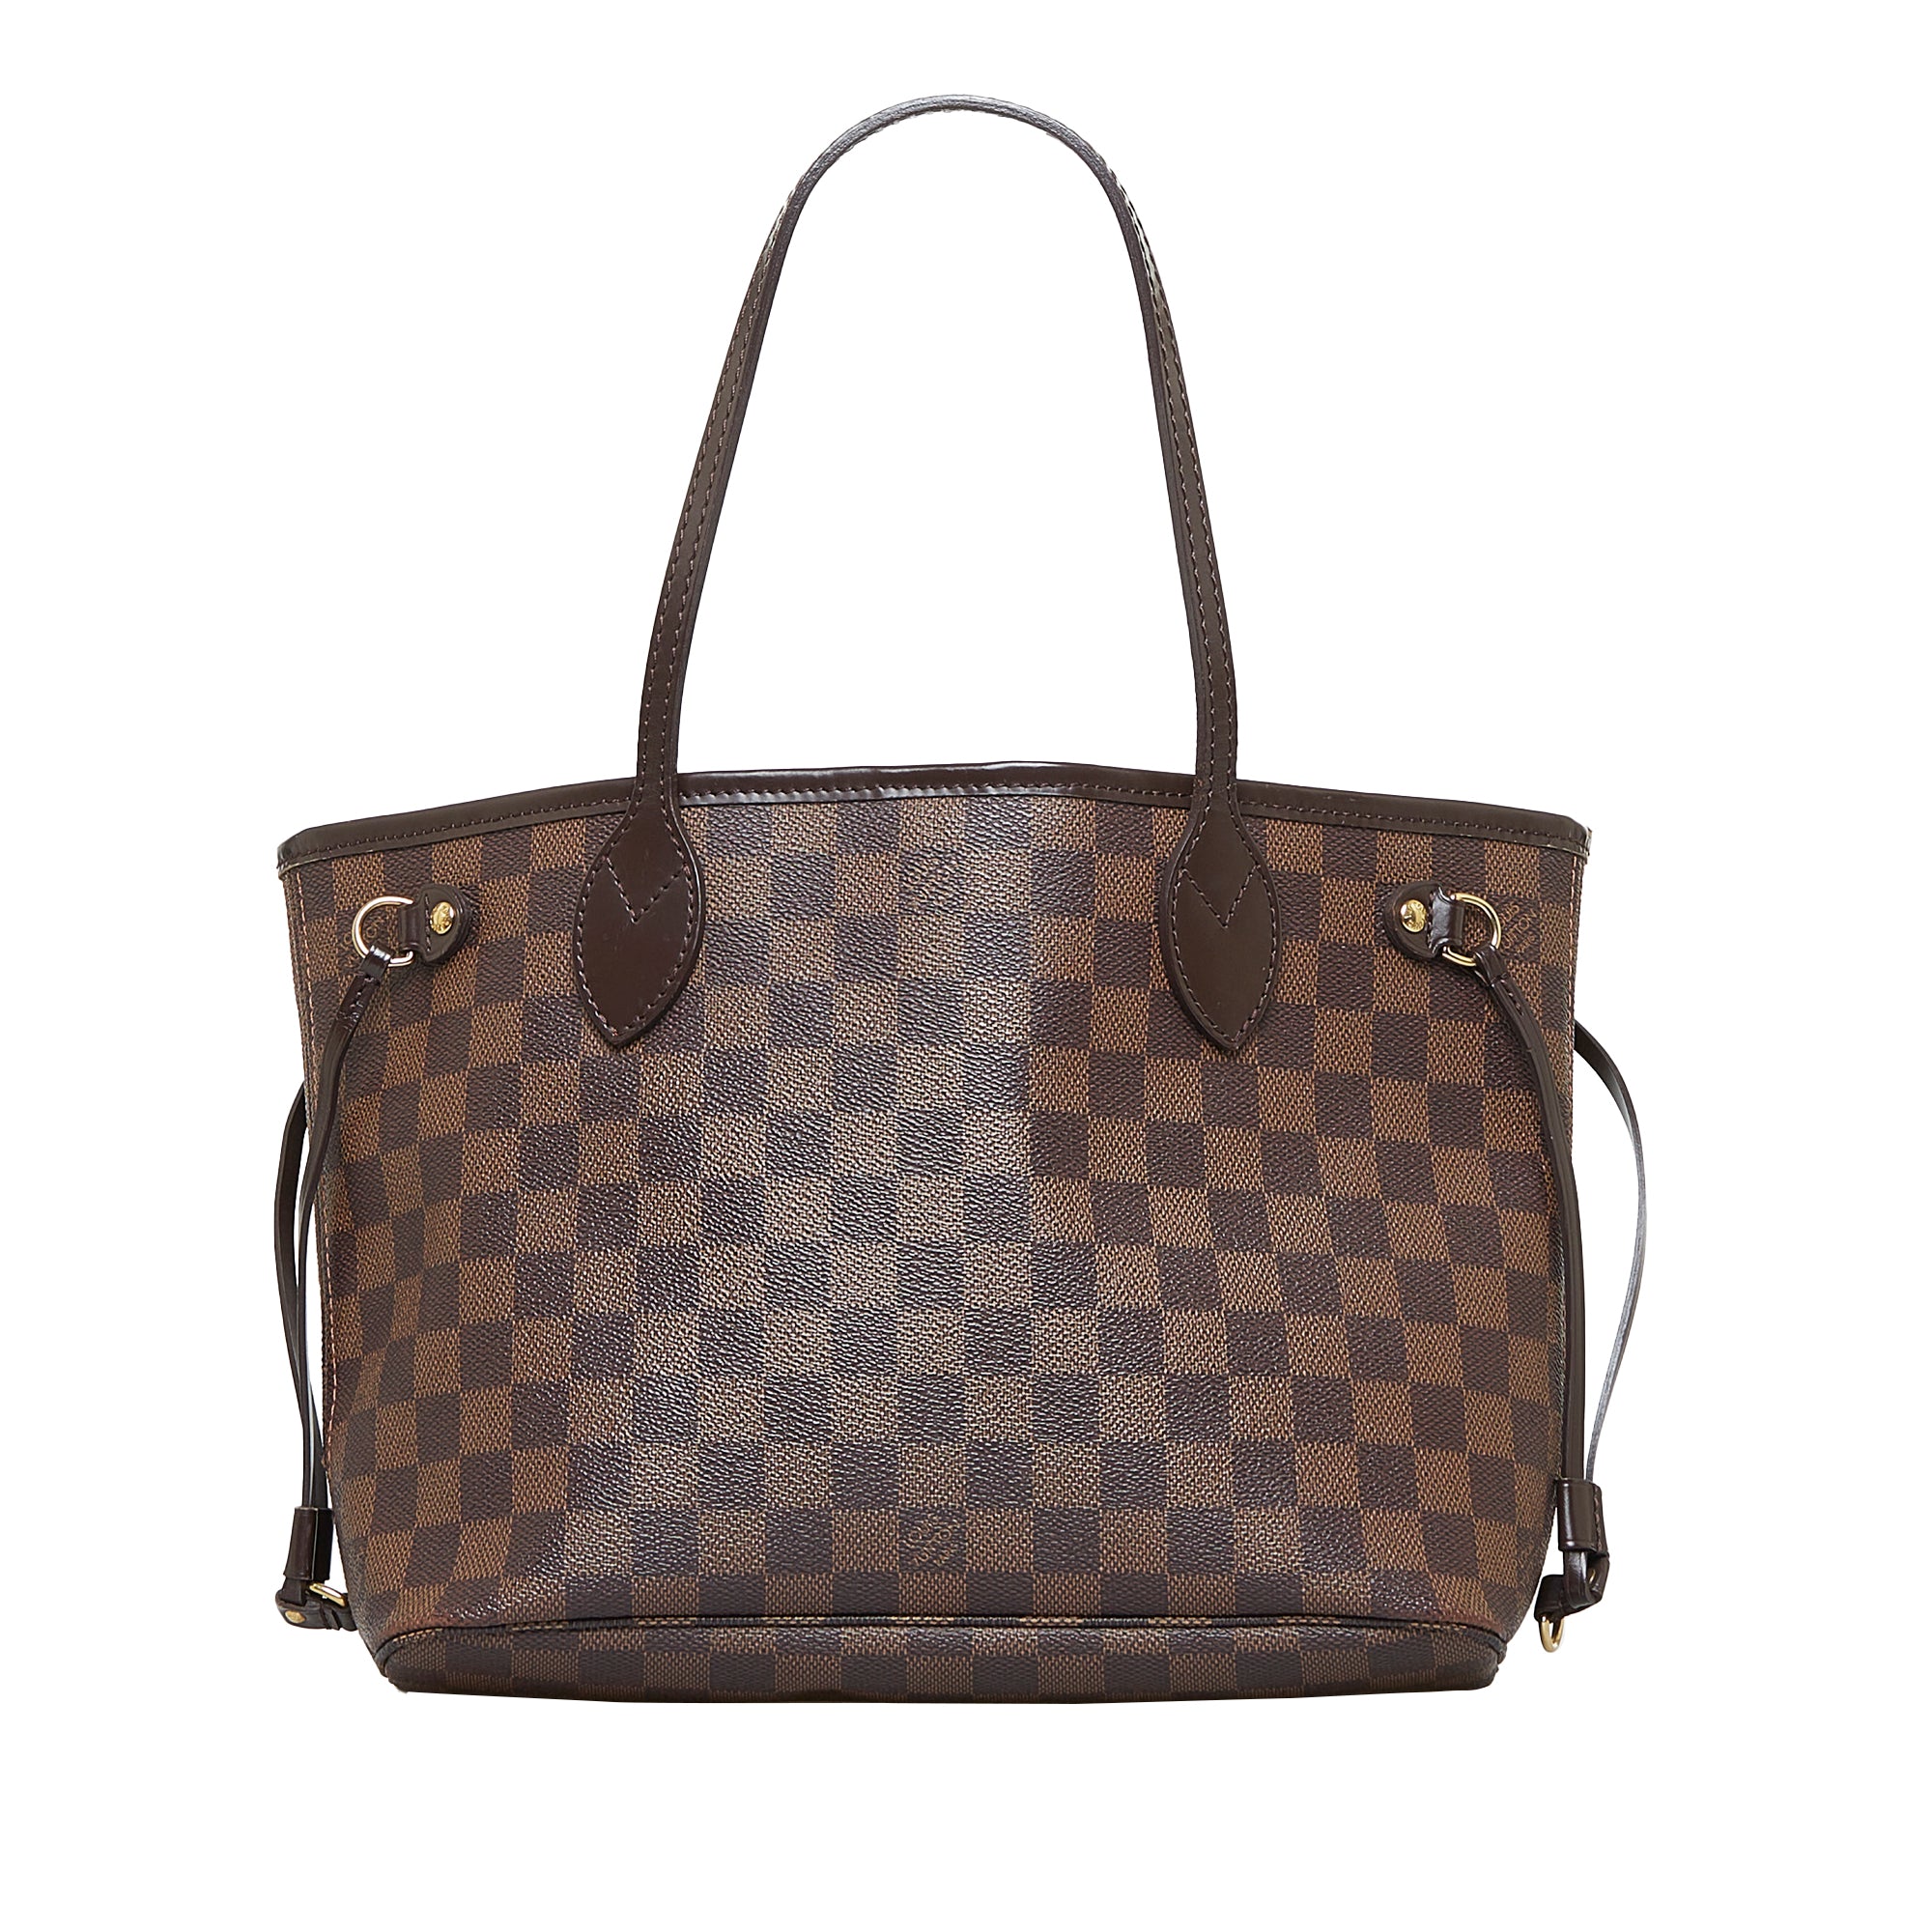 Louis Vuitton Small Damier Azur Neverfull PM Tote Bag